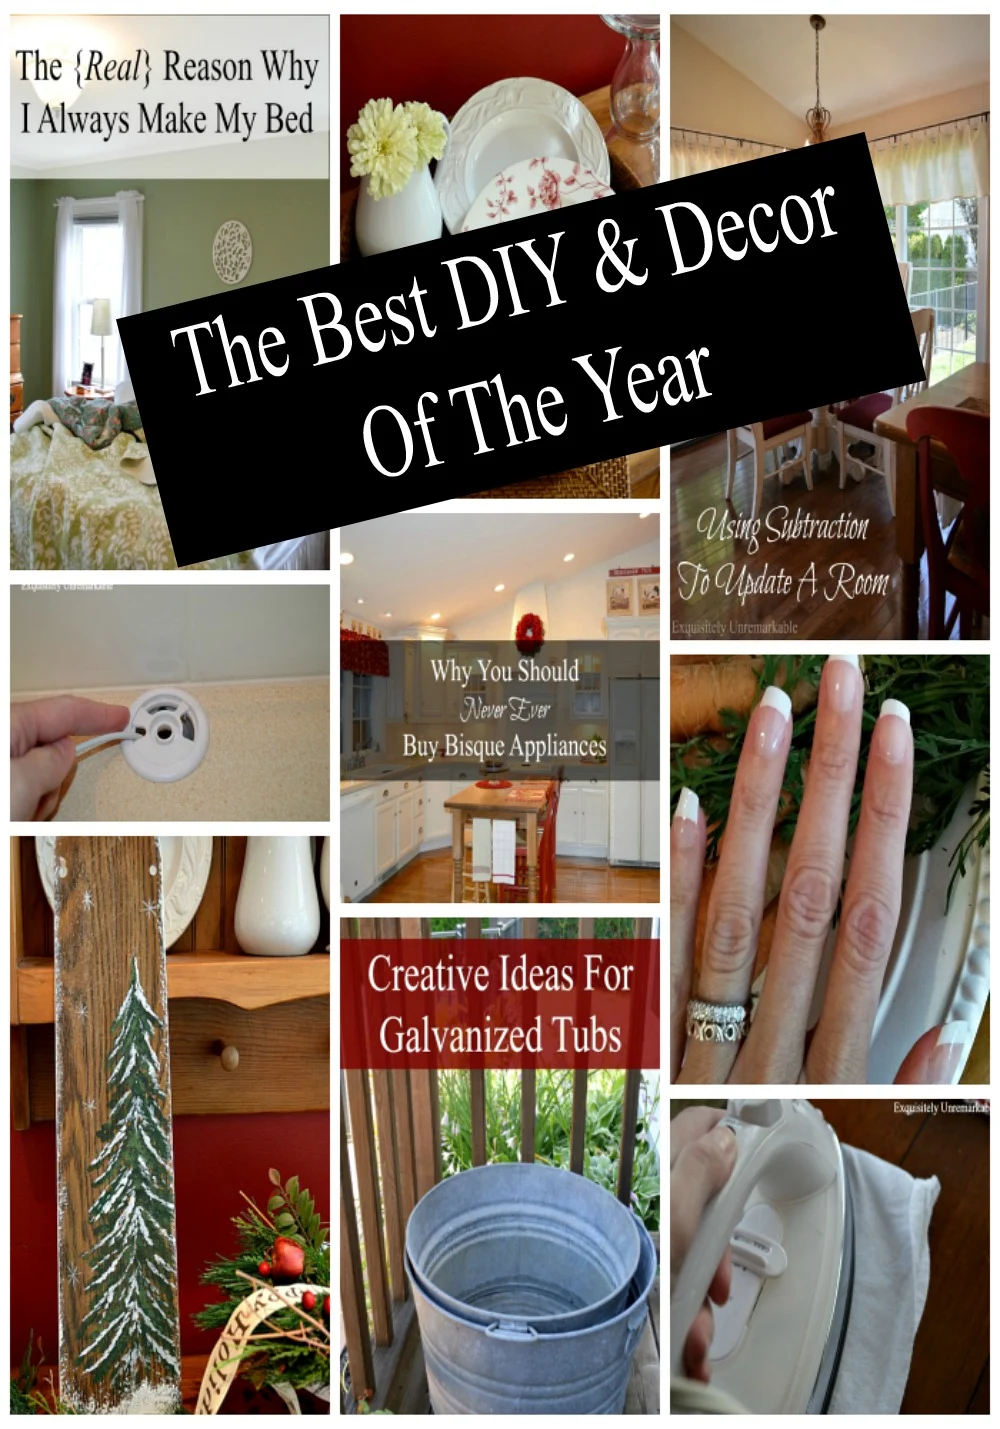 The Best DIY & Decor Ideas Of The Year